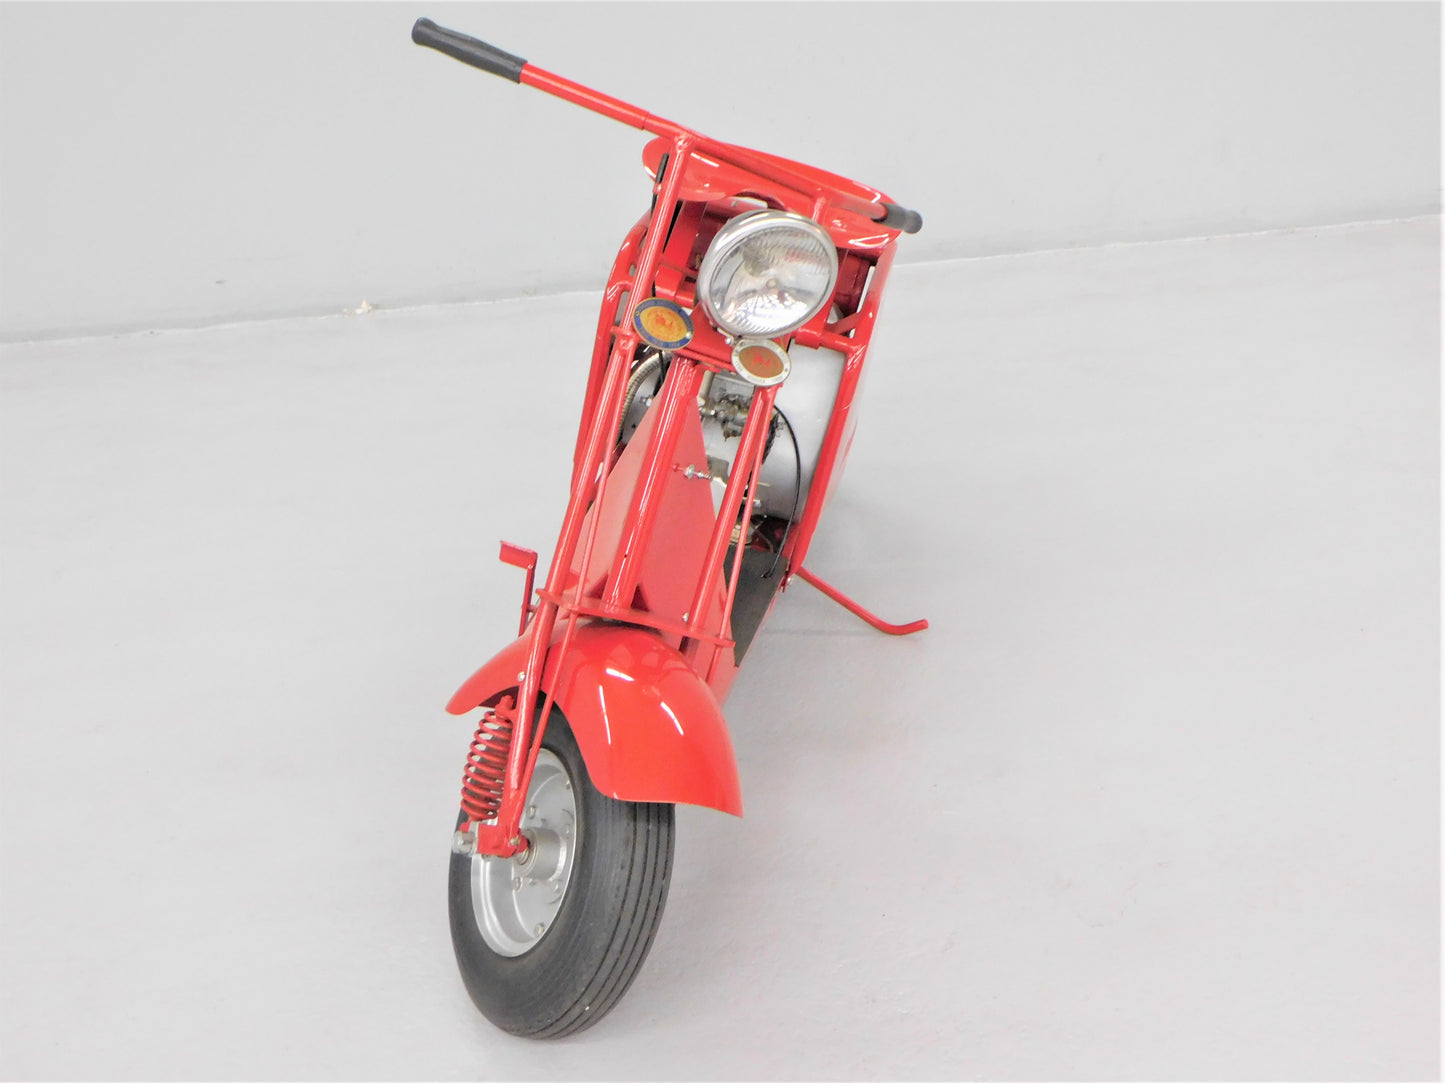 1951 Allstate Scooter